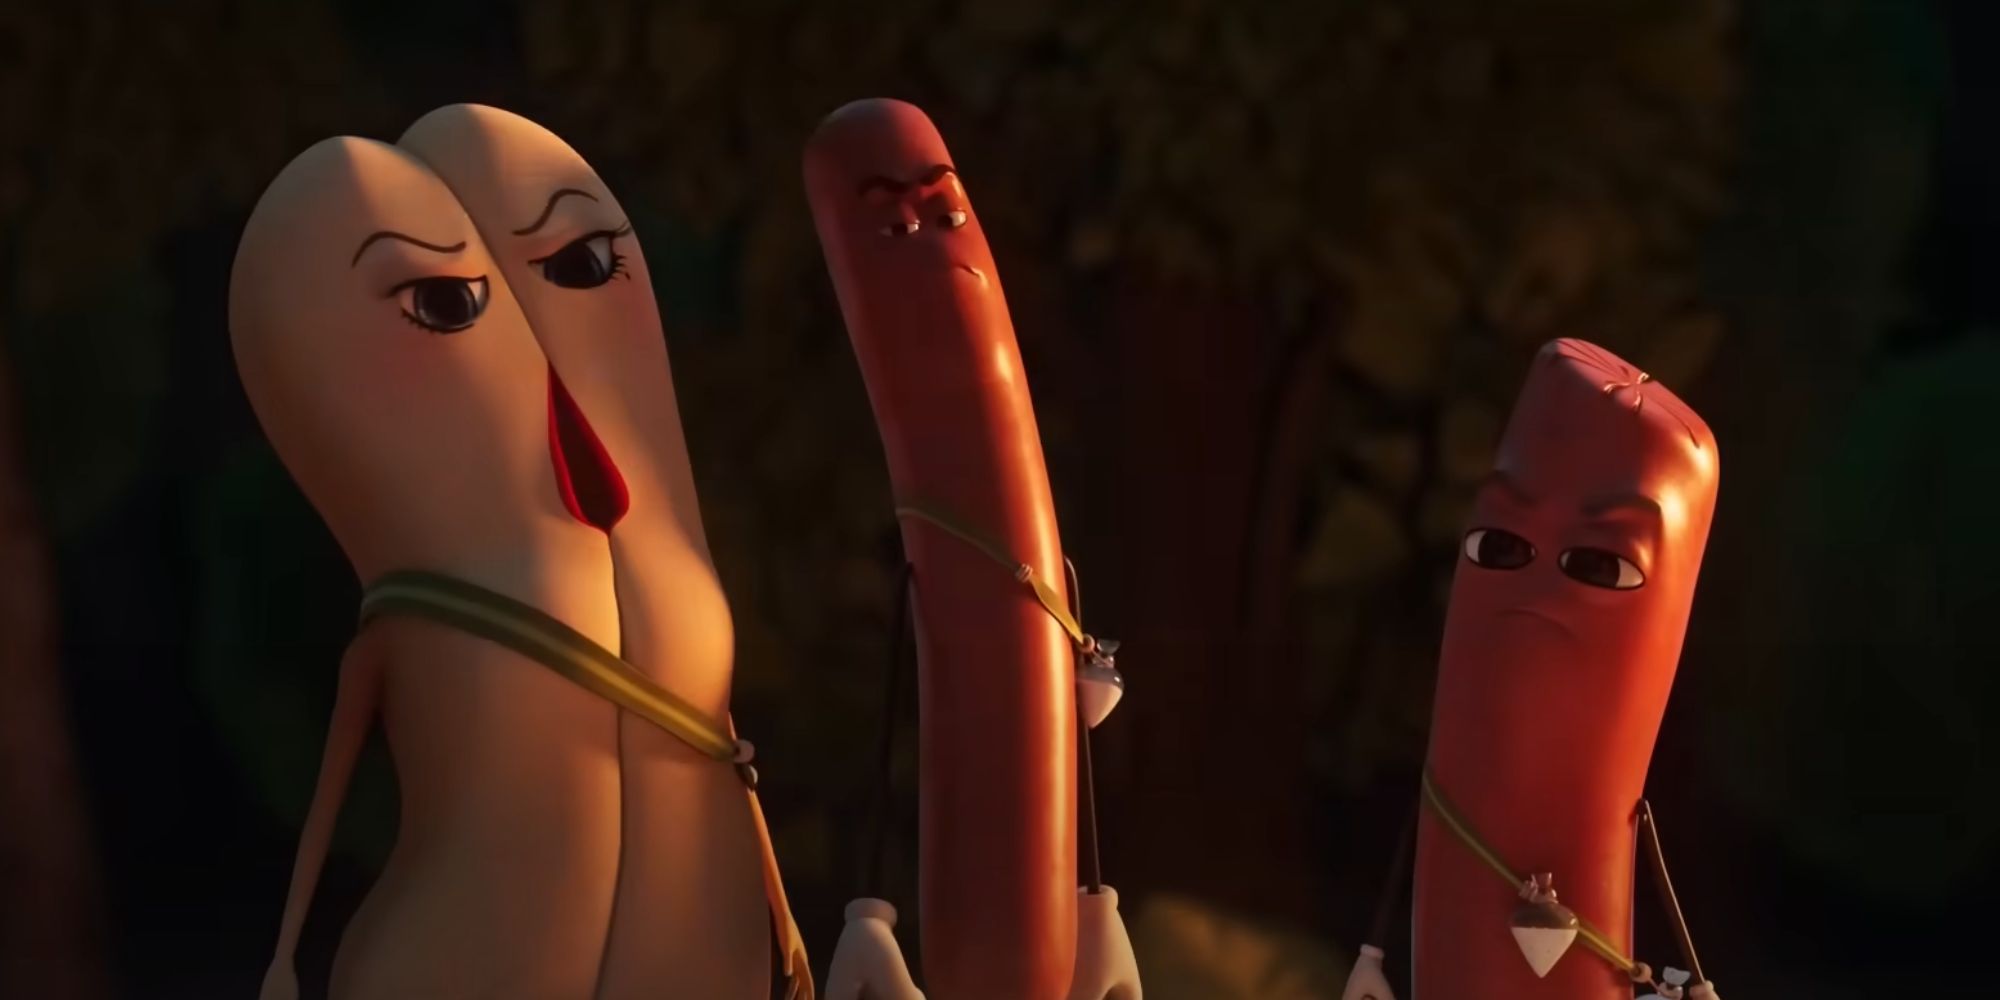 Two determined sausages and a bun in the Sausage Party: Foodtopia trailer